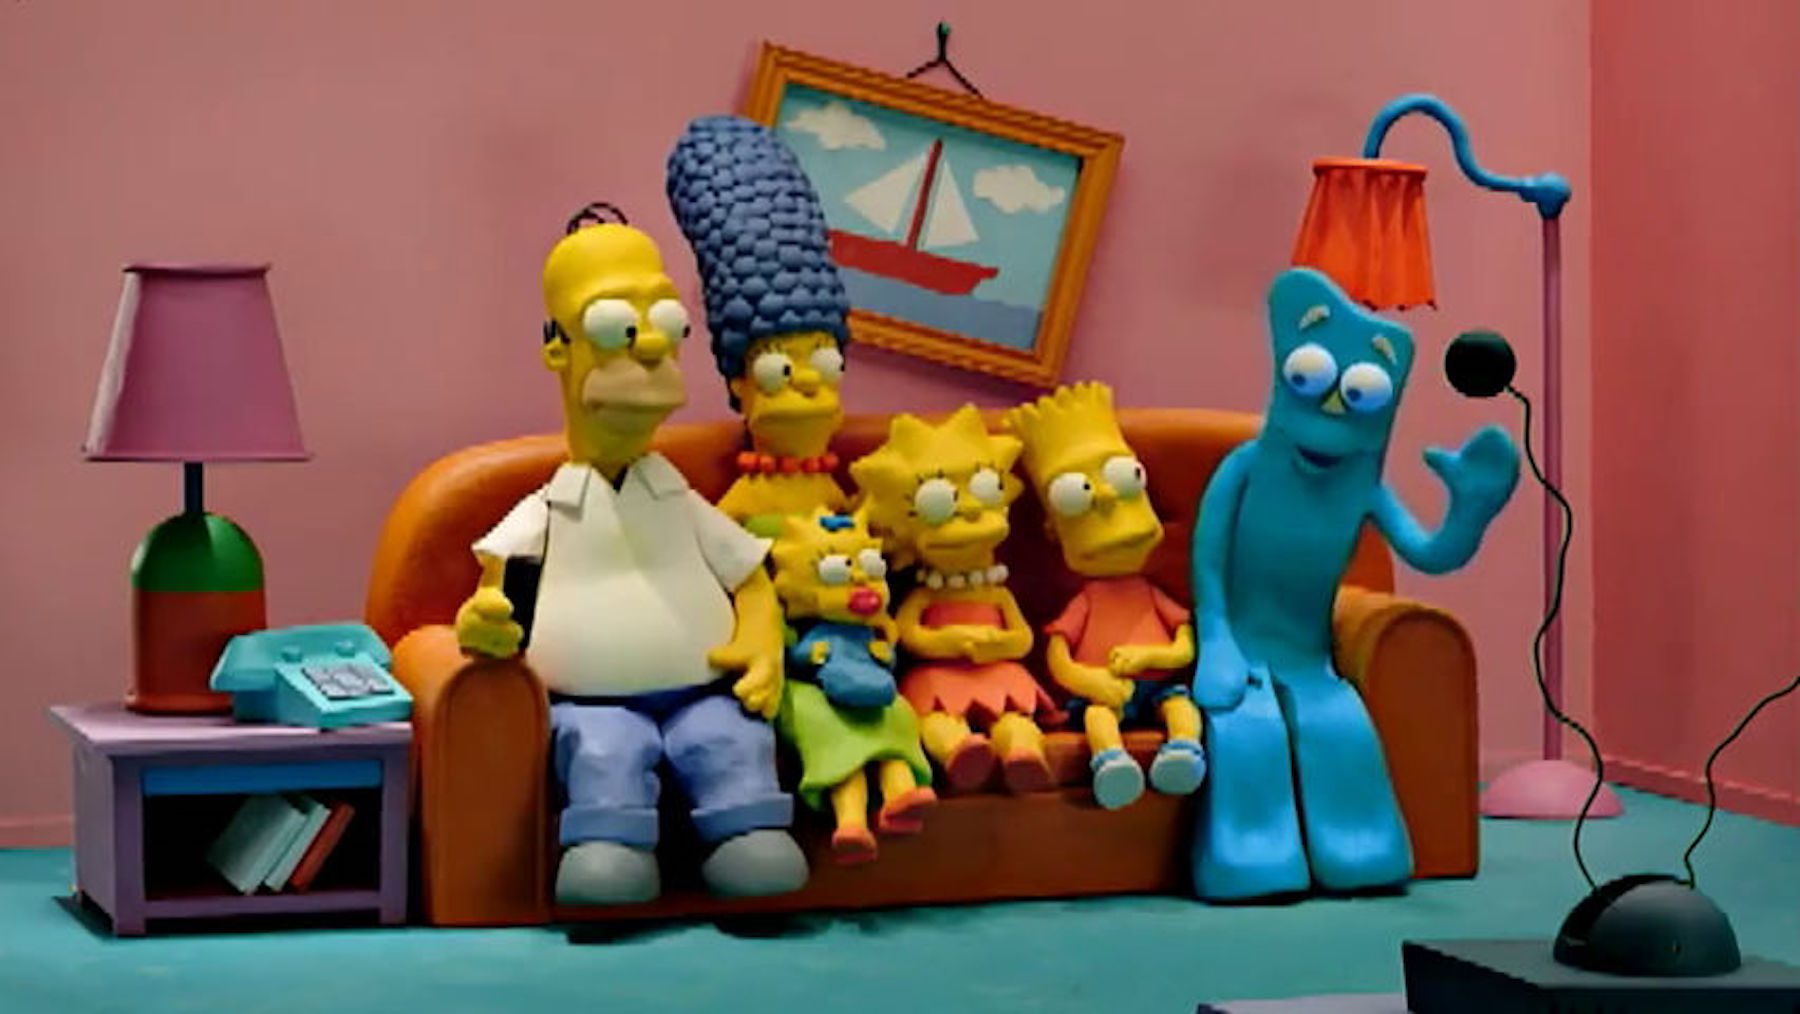 Claymation Simpsons couch gag featuring Gumby.